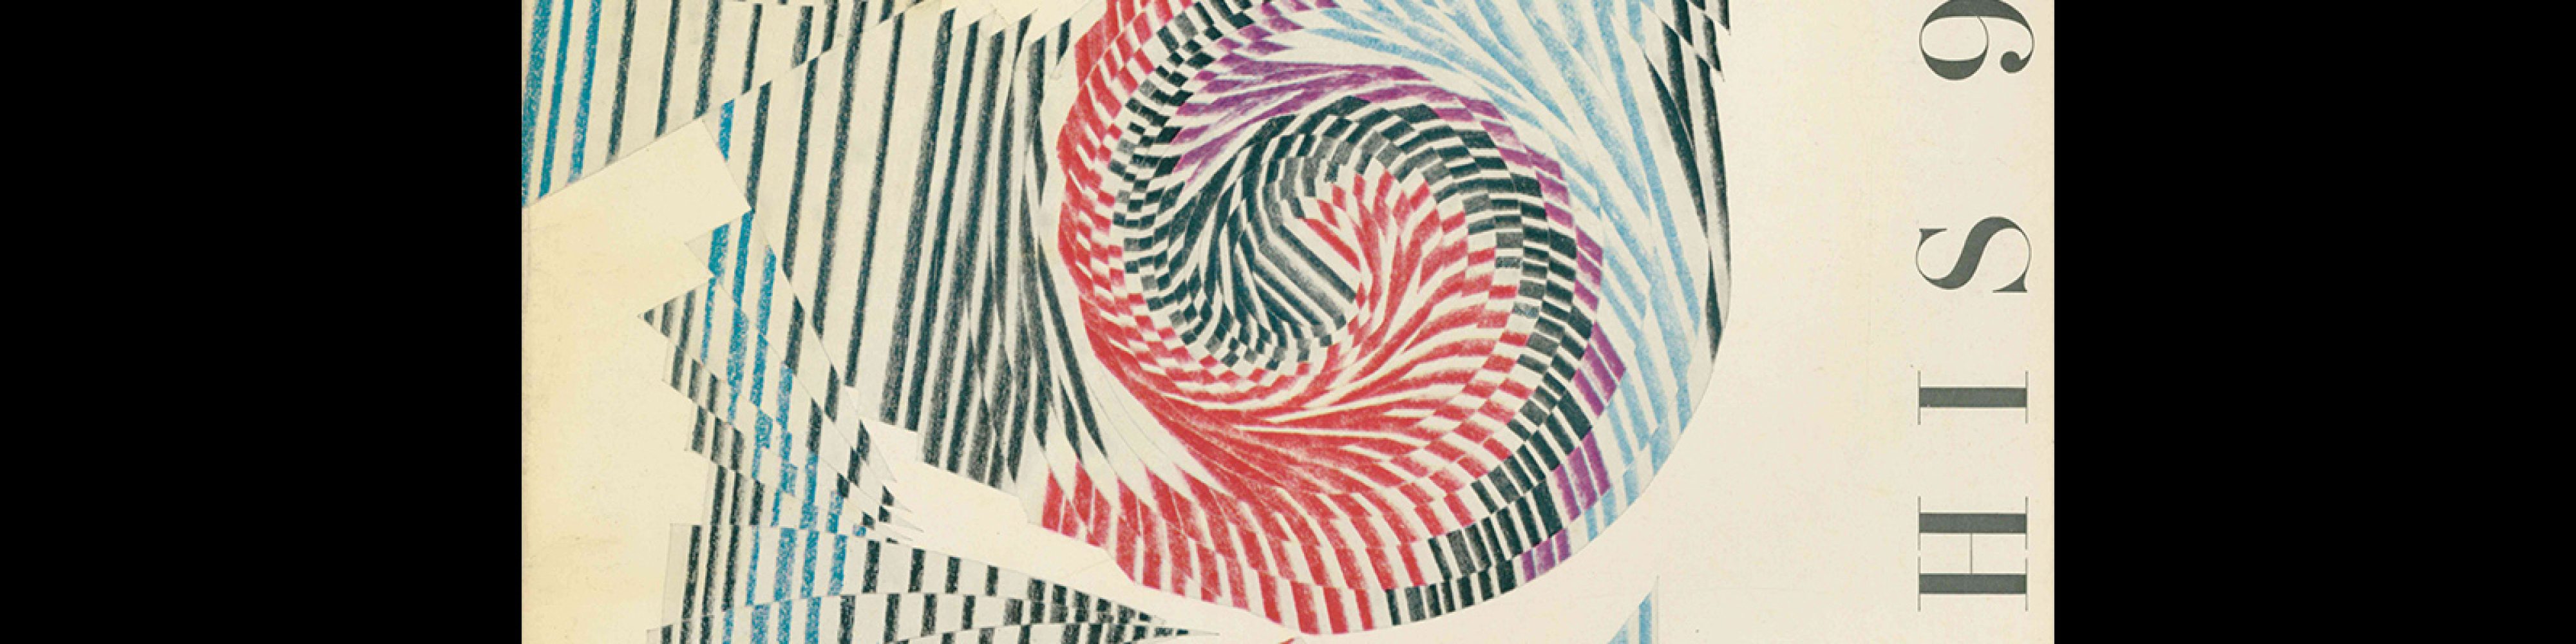 Graphis 96, 1961. Cover design by Willy Eidenbenz.